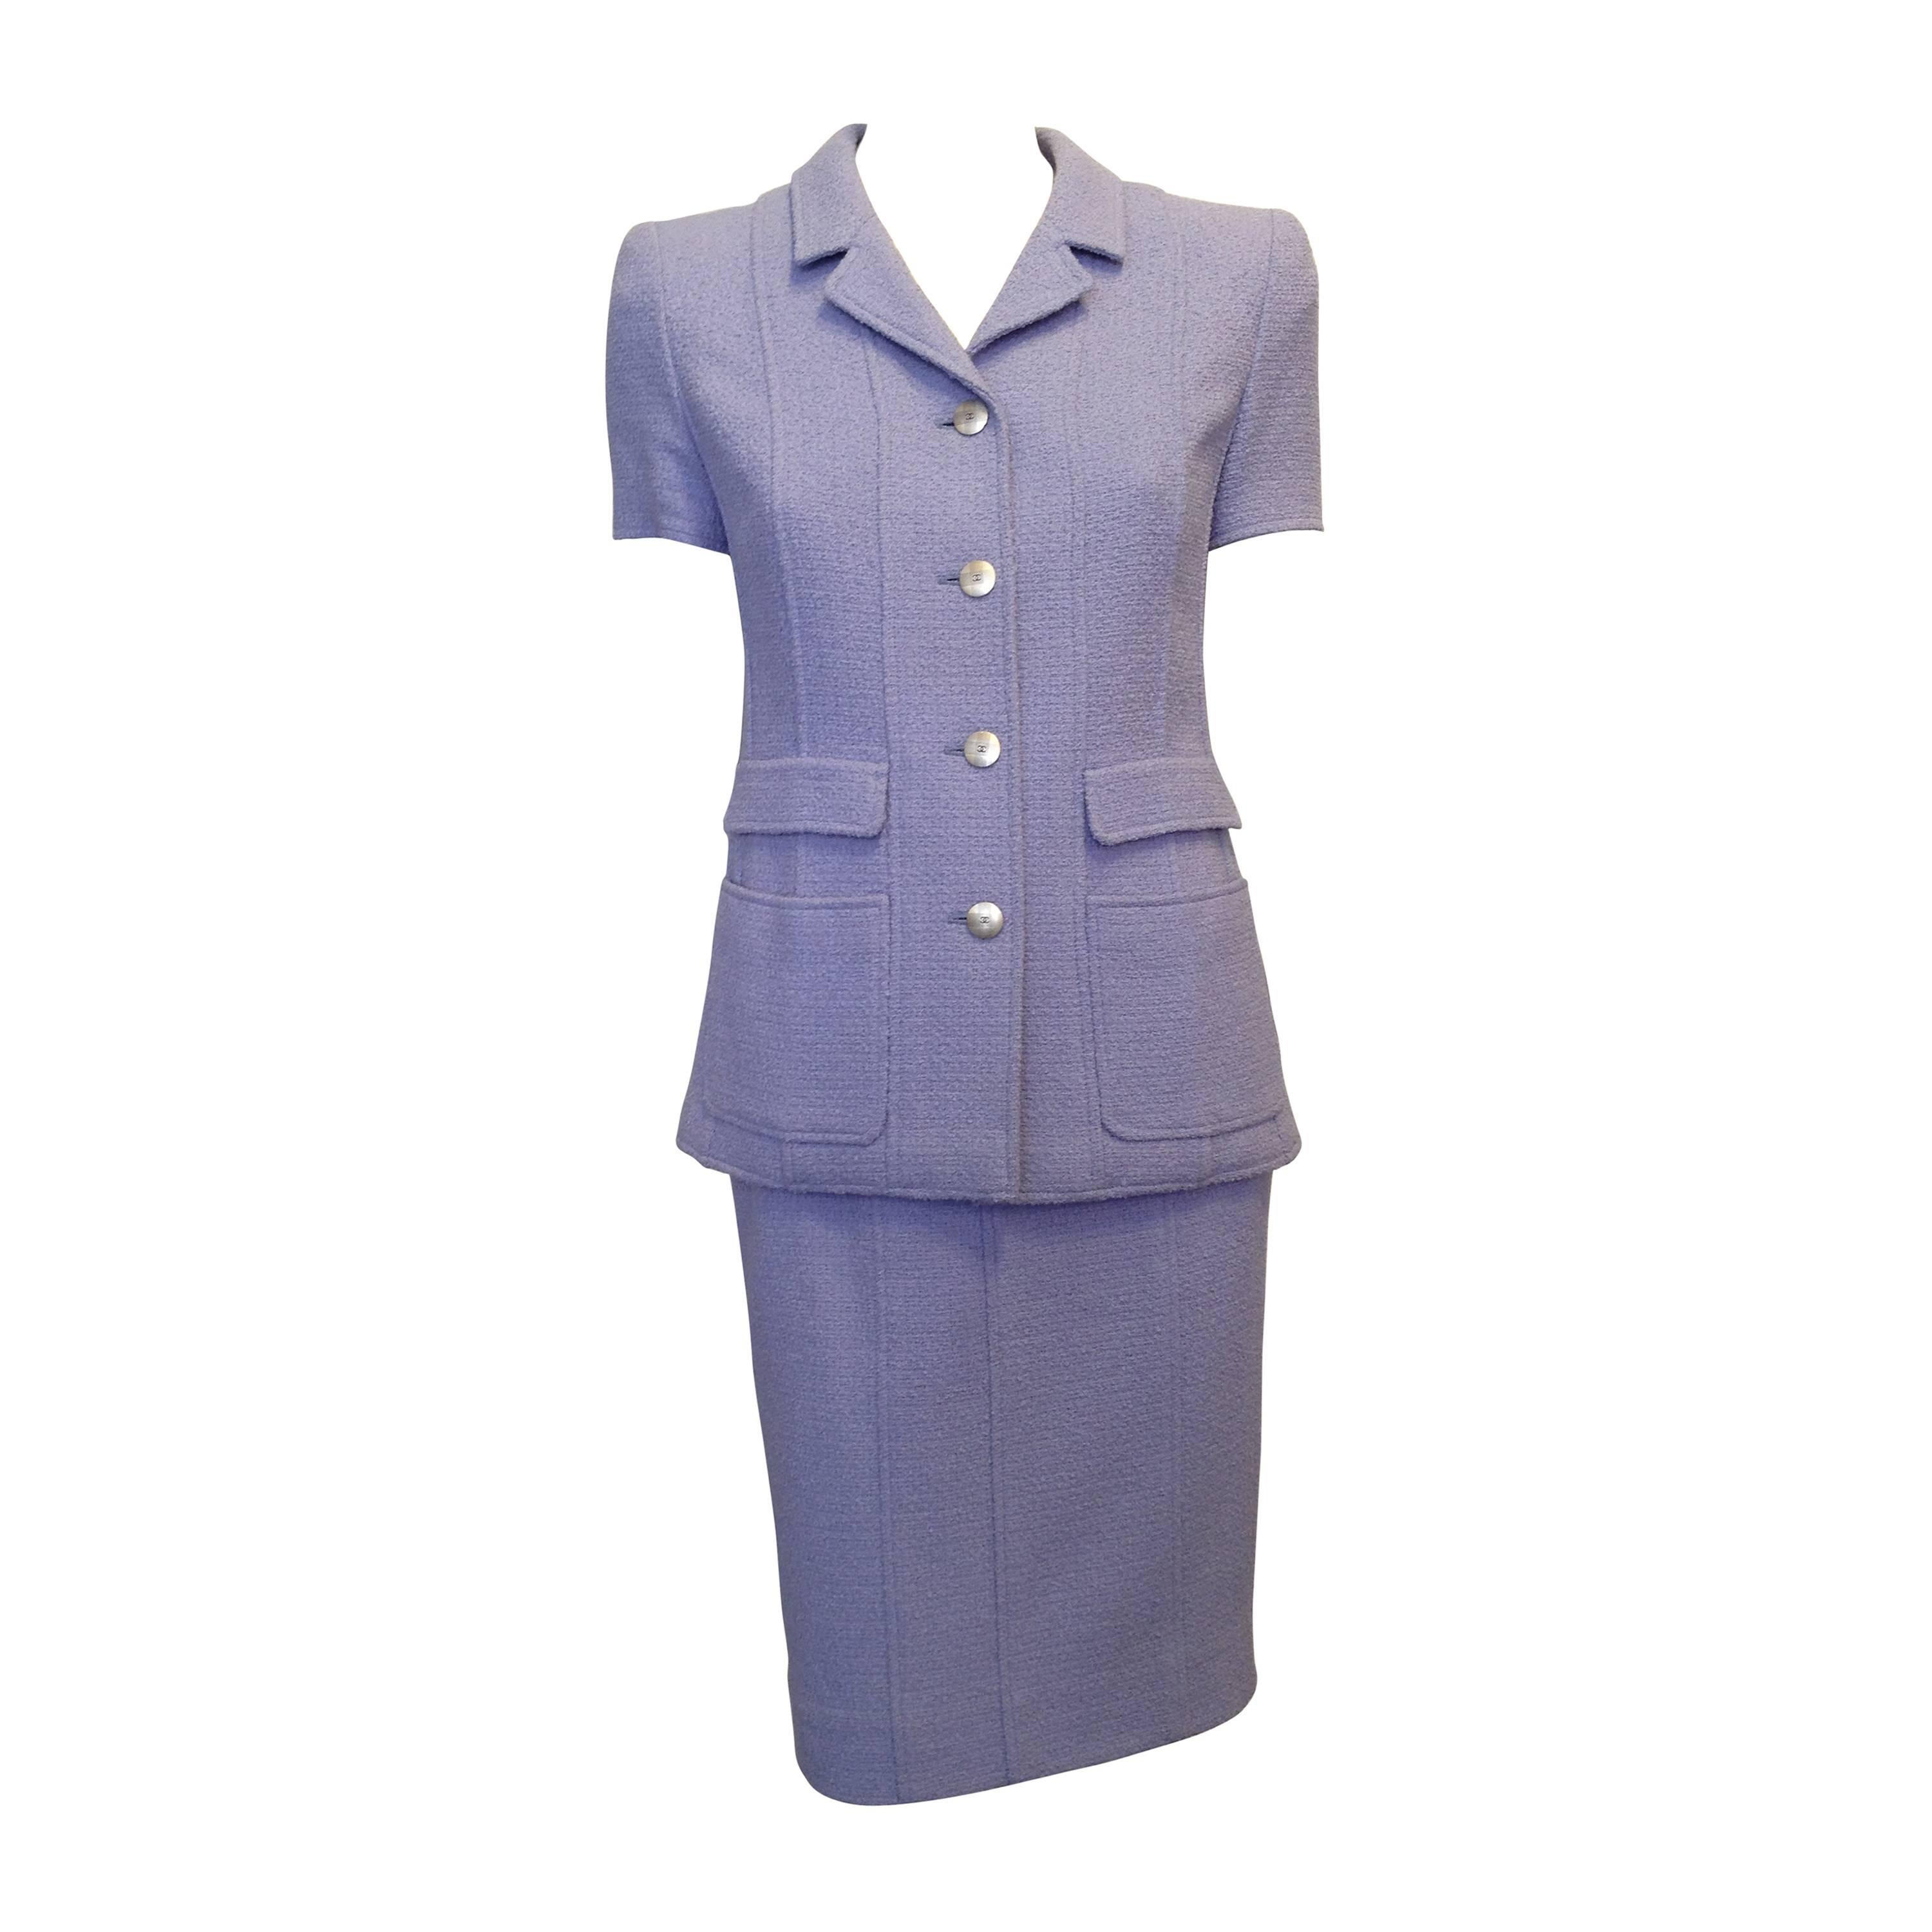 Chanel Periwinkle Blue Tweed Skirt Suit For Sale